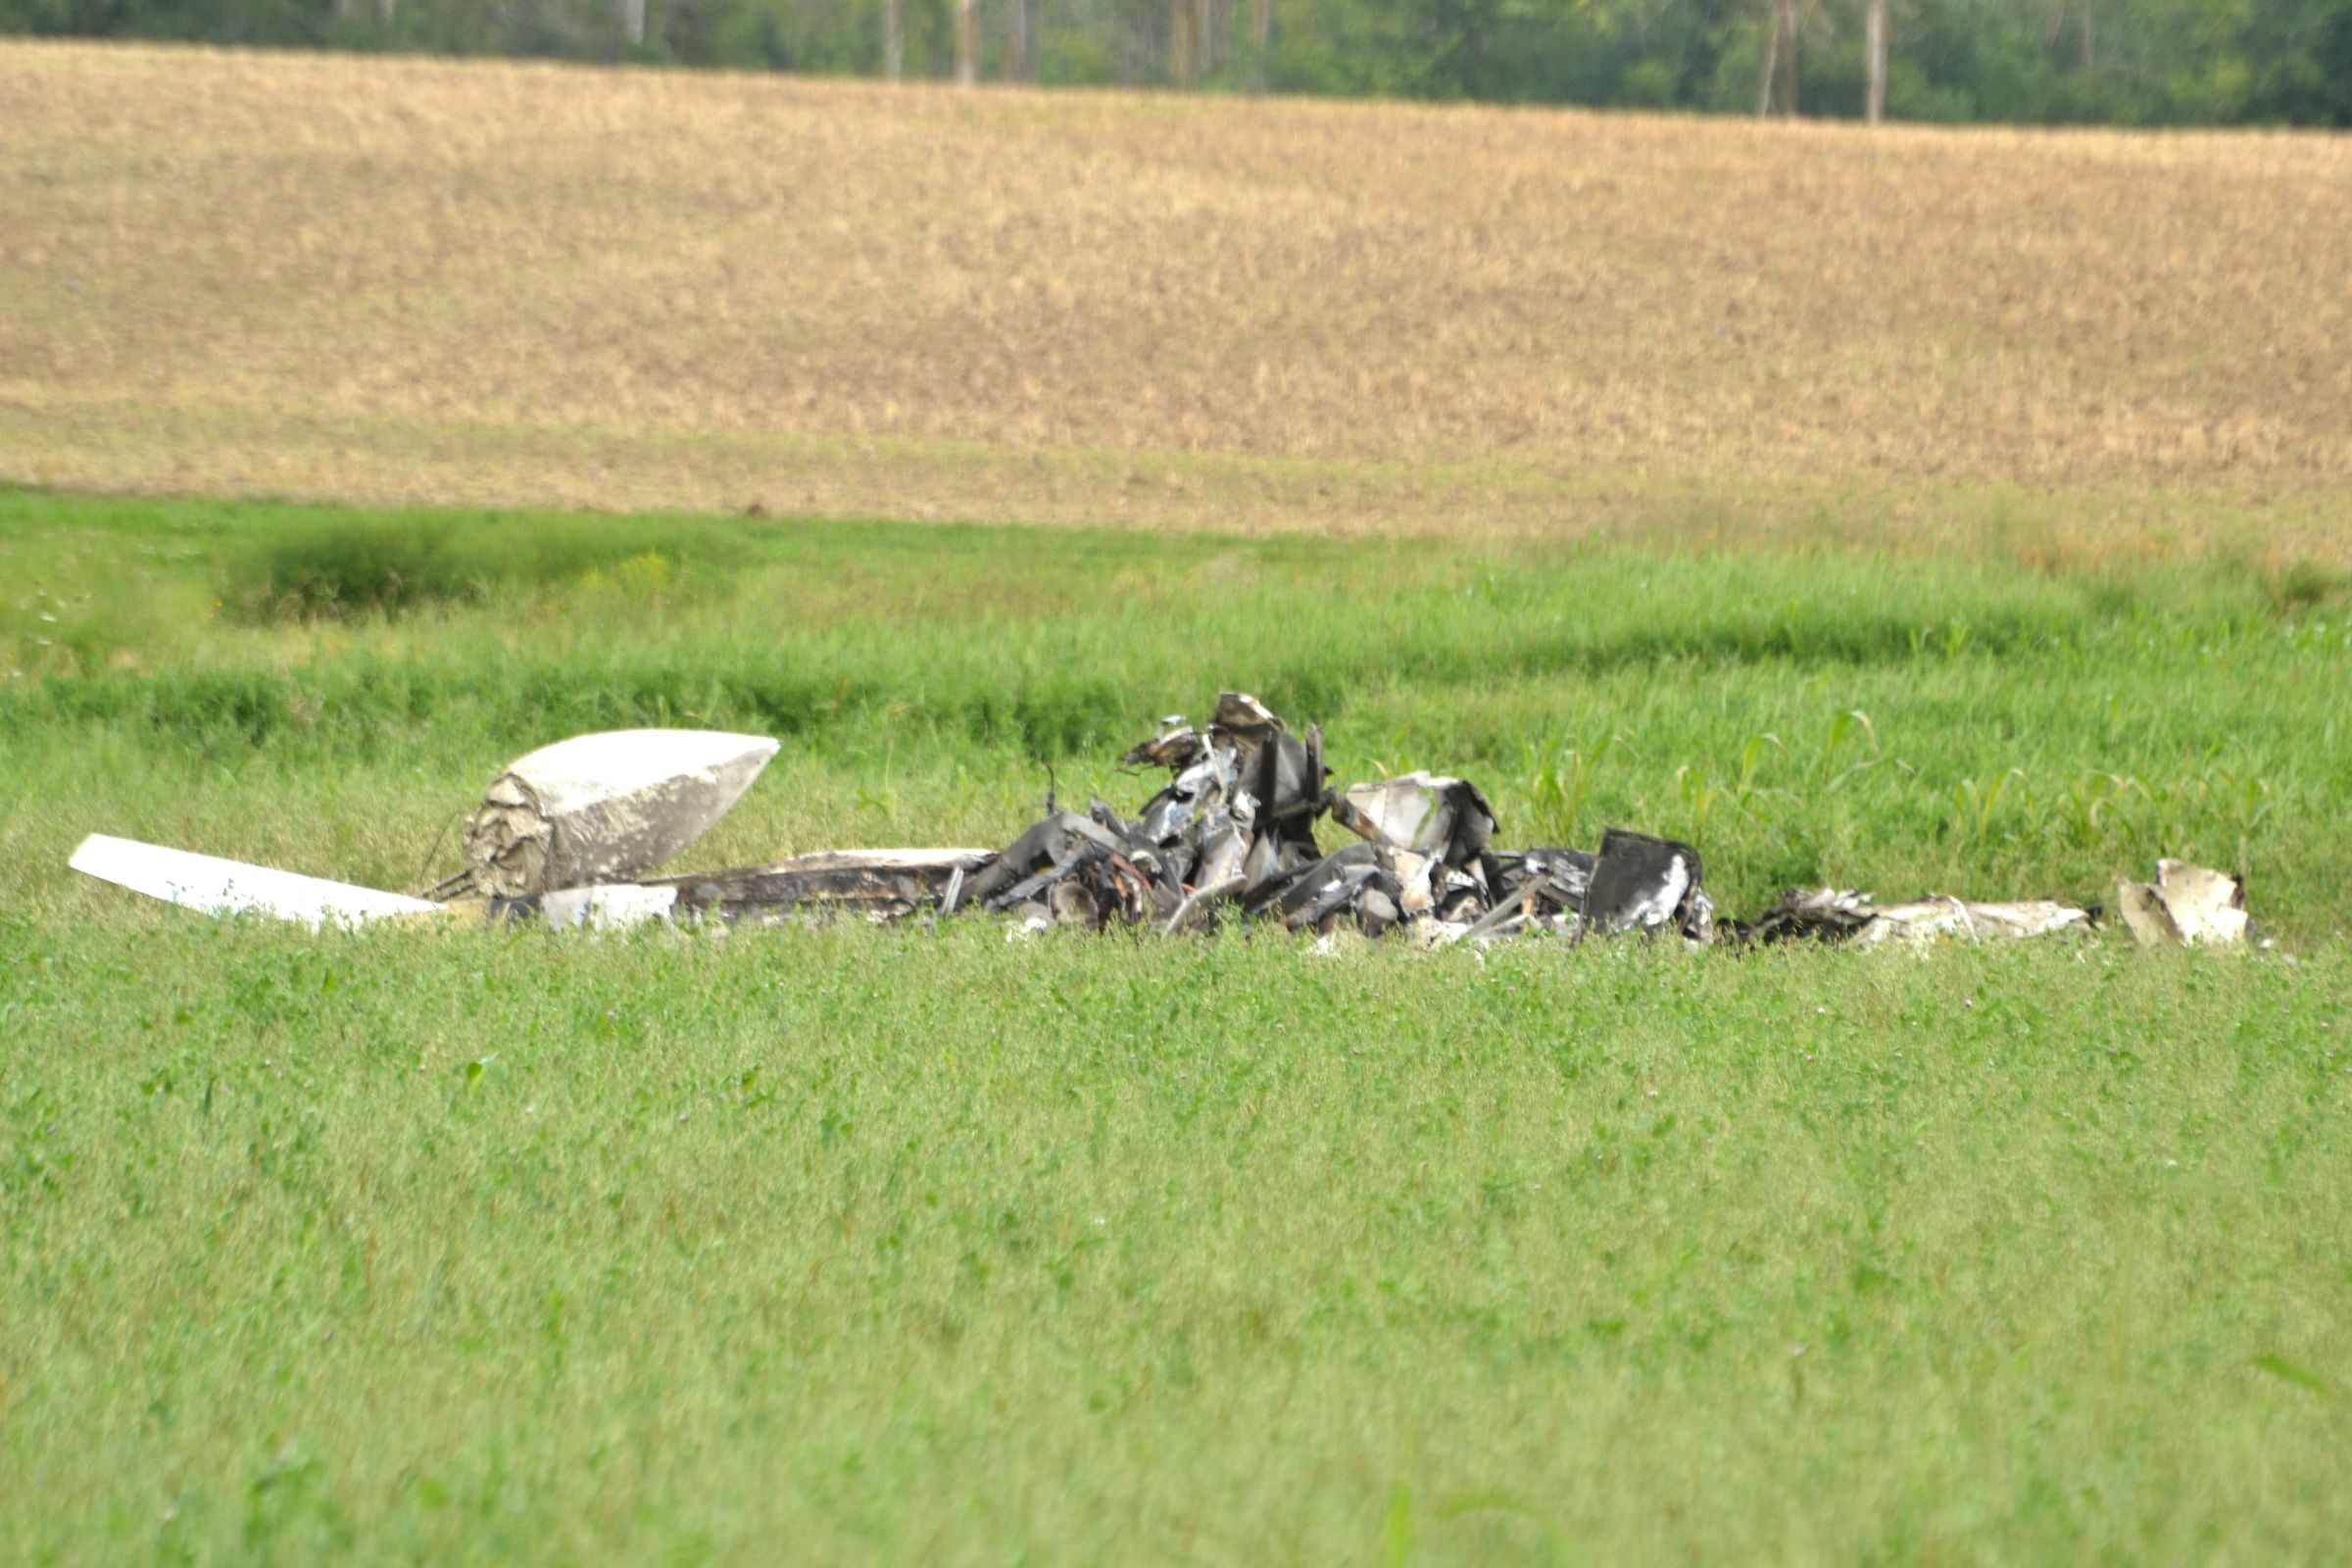 Plane involved in fatal Stratford crash left from Sarnia airport